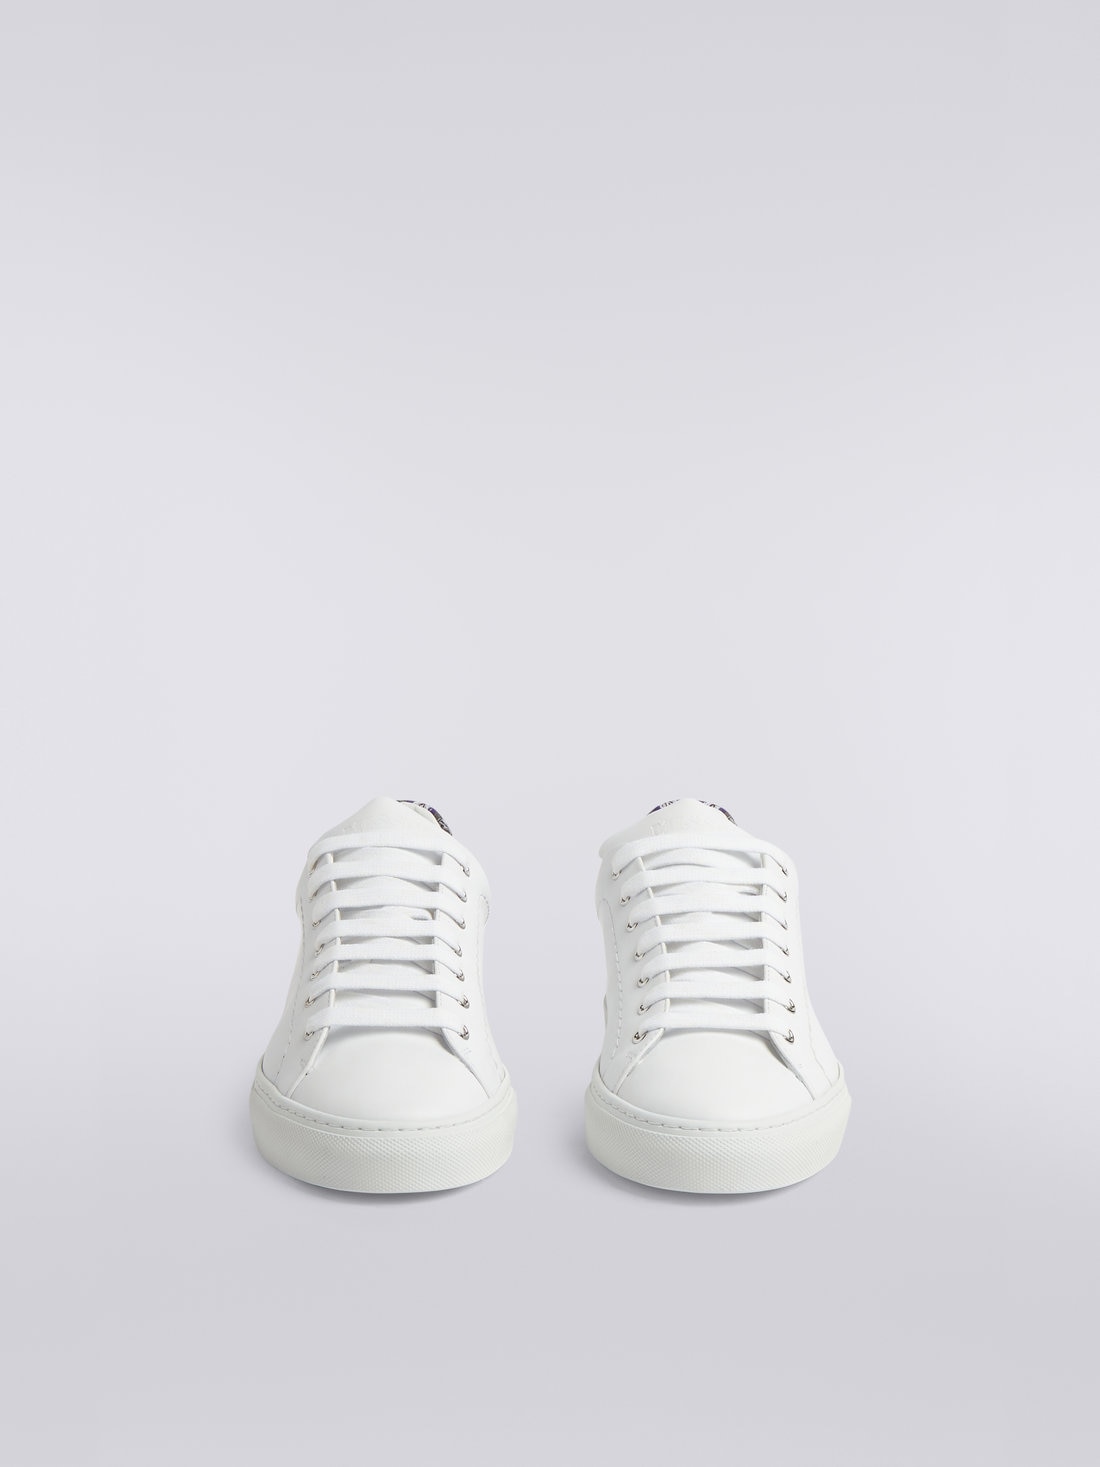 Leather trainers with chevron knit details, White  - OS23SY02BL007USM8MU - 2